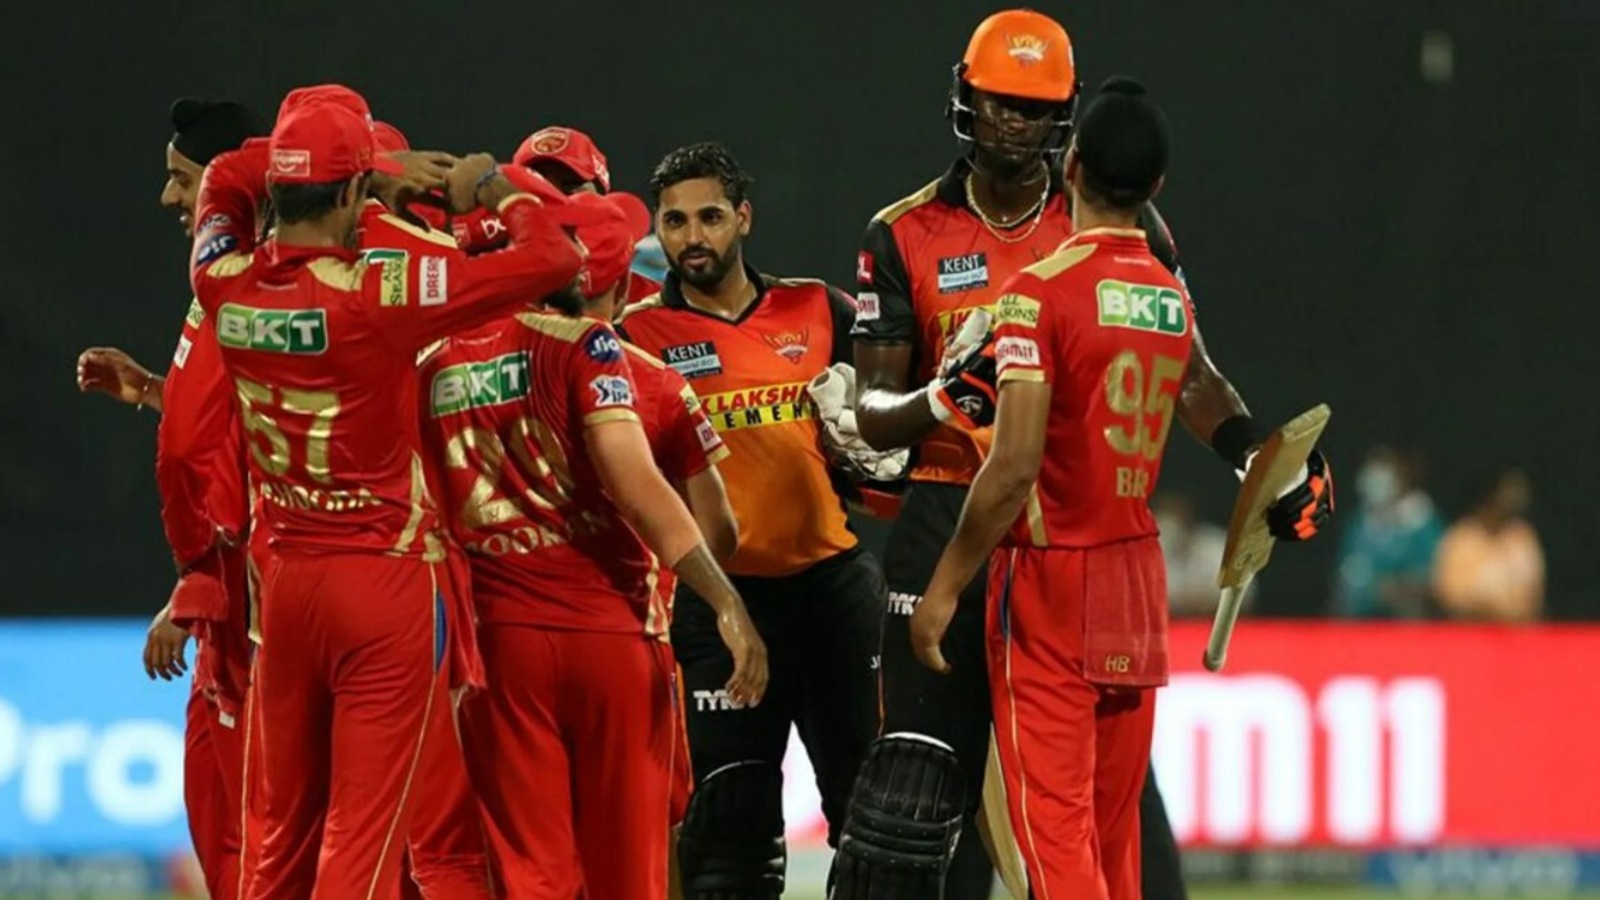 SRH vs PBKS Highlights, IPL 2021 Bowlers shine as Punjab defend 125 to win thriller by 5 runs against Hyderabad Hindustan Times